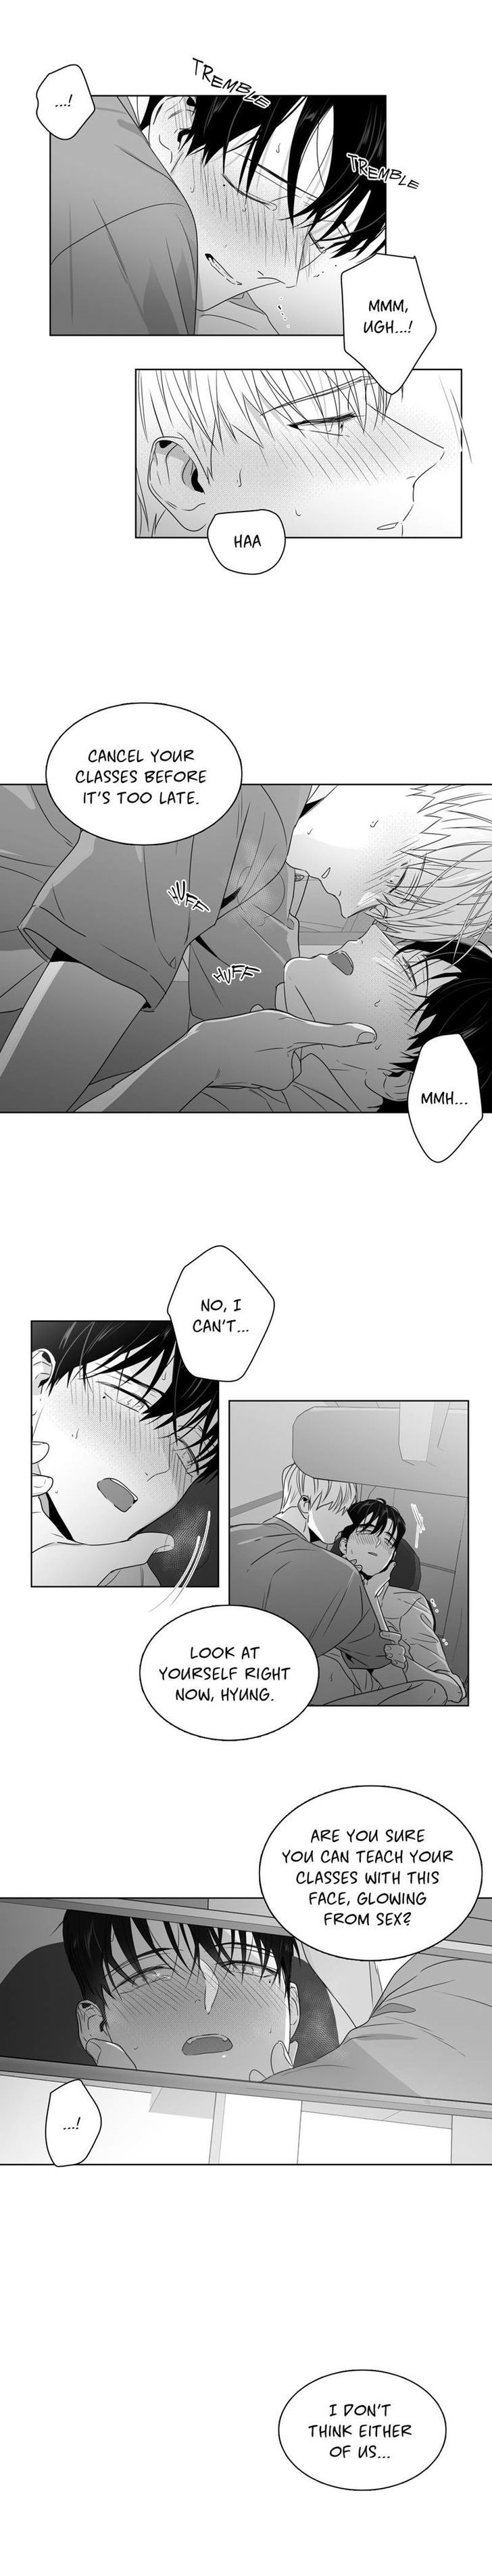 Lover Boy (Lezhin) Chapter 040 page 3